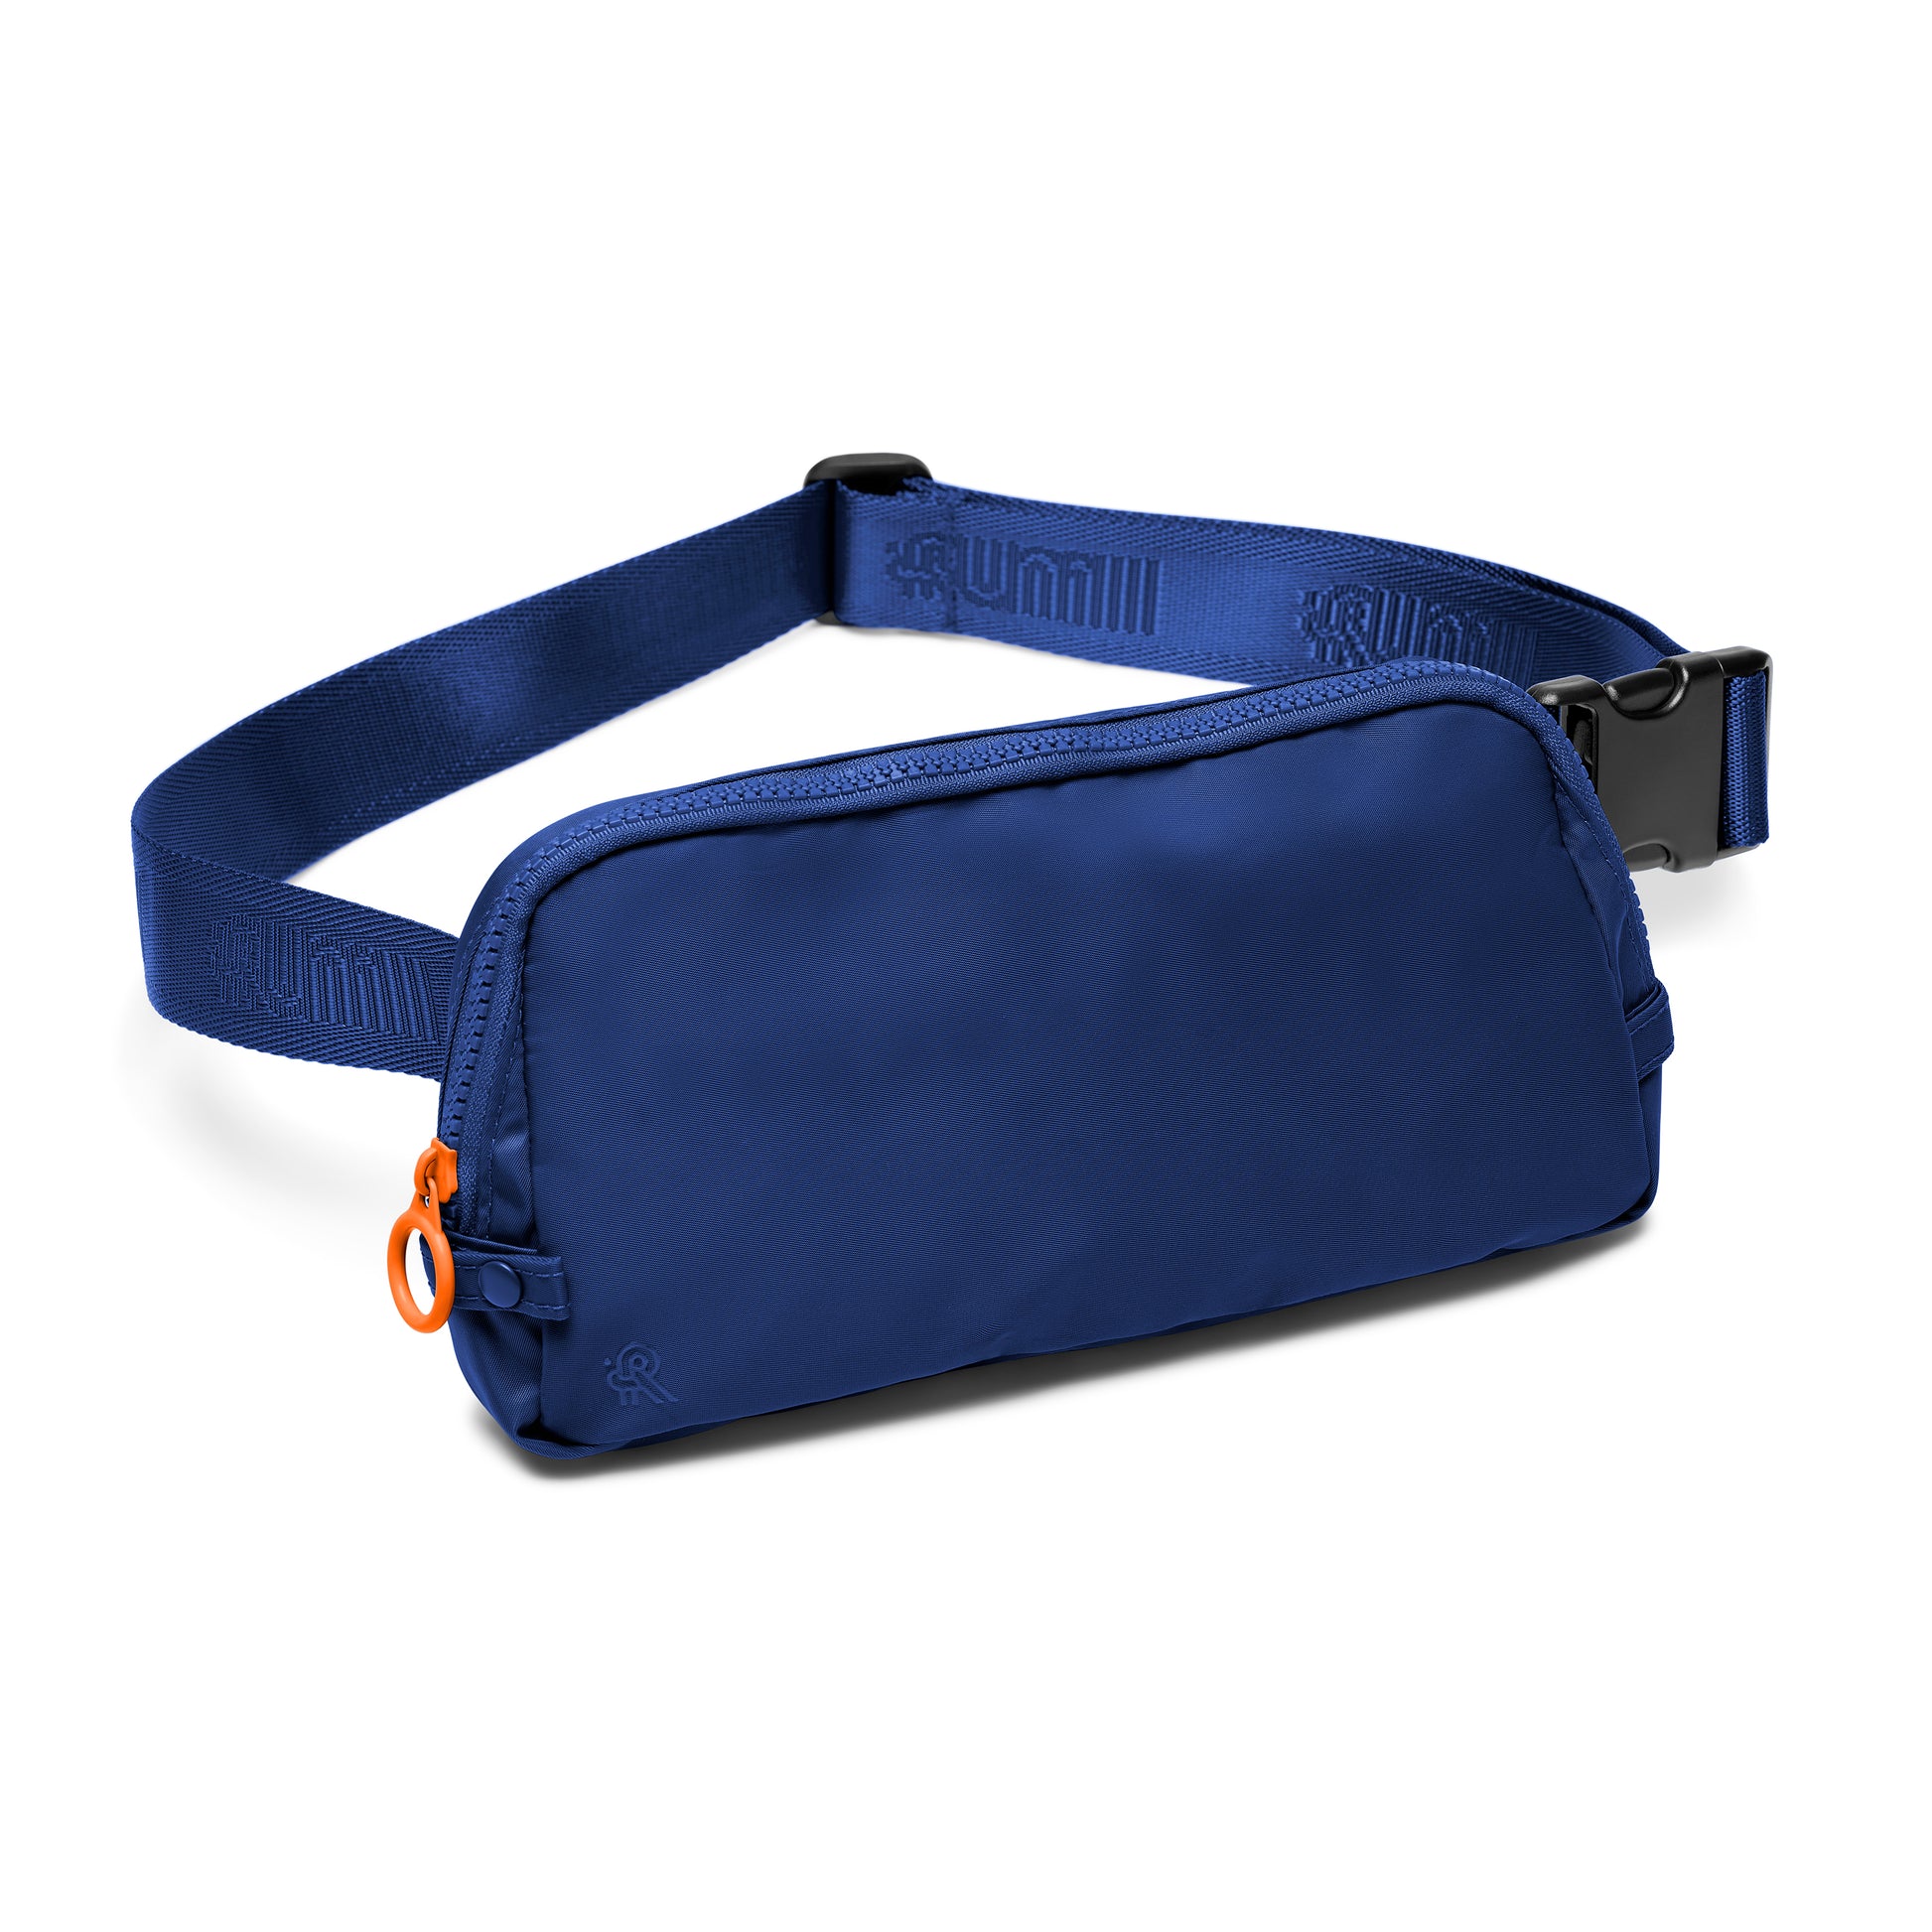 Navy blue and orange bag for essential workers